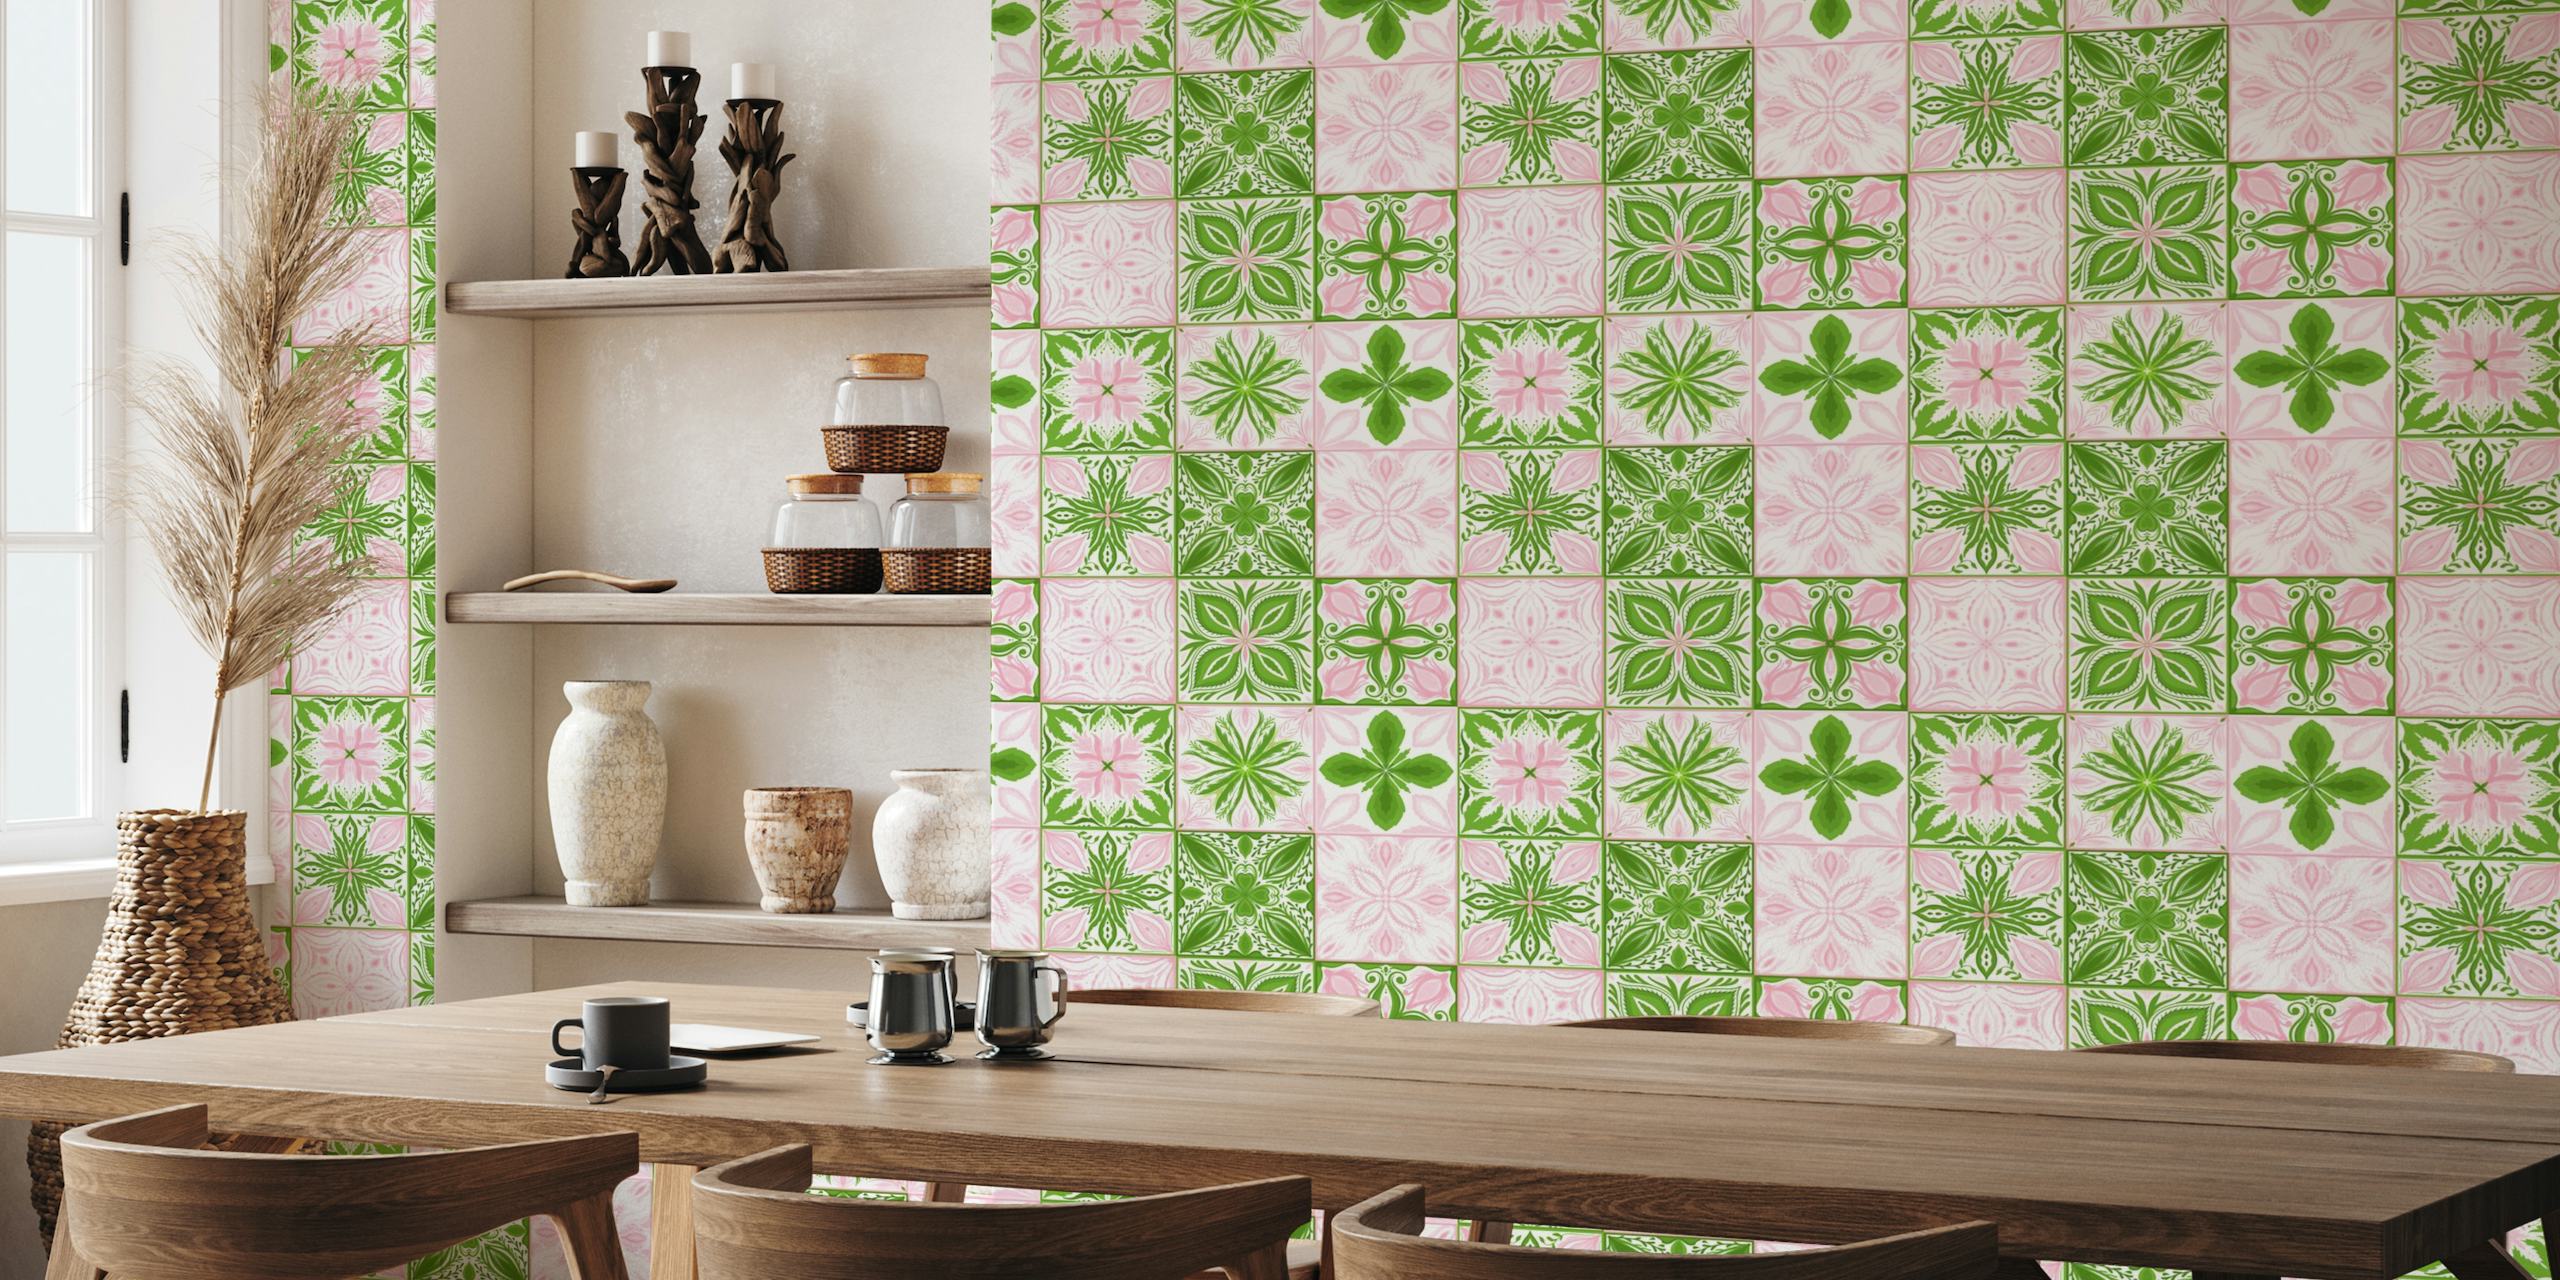 Ornate tiles in pink and green papel de parede